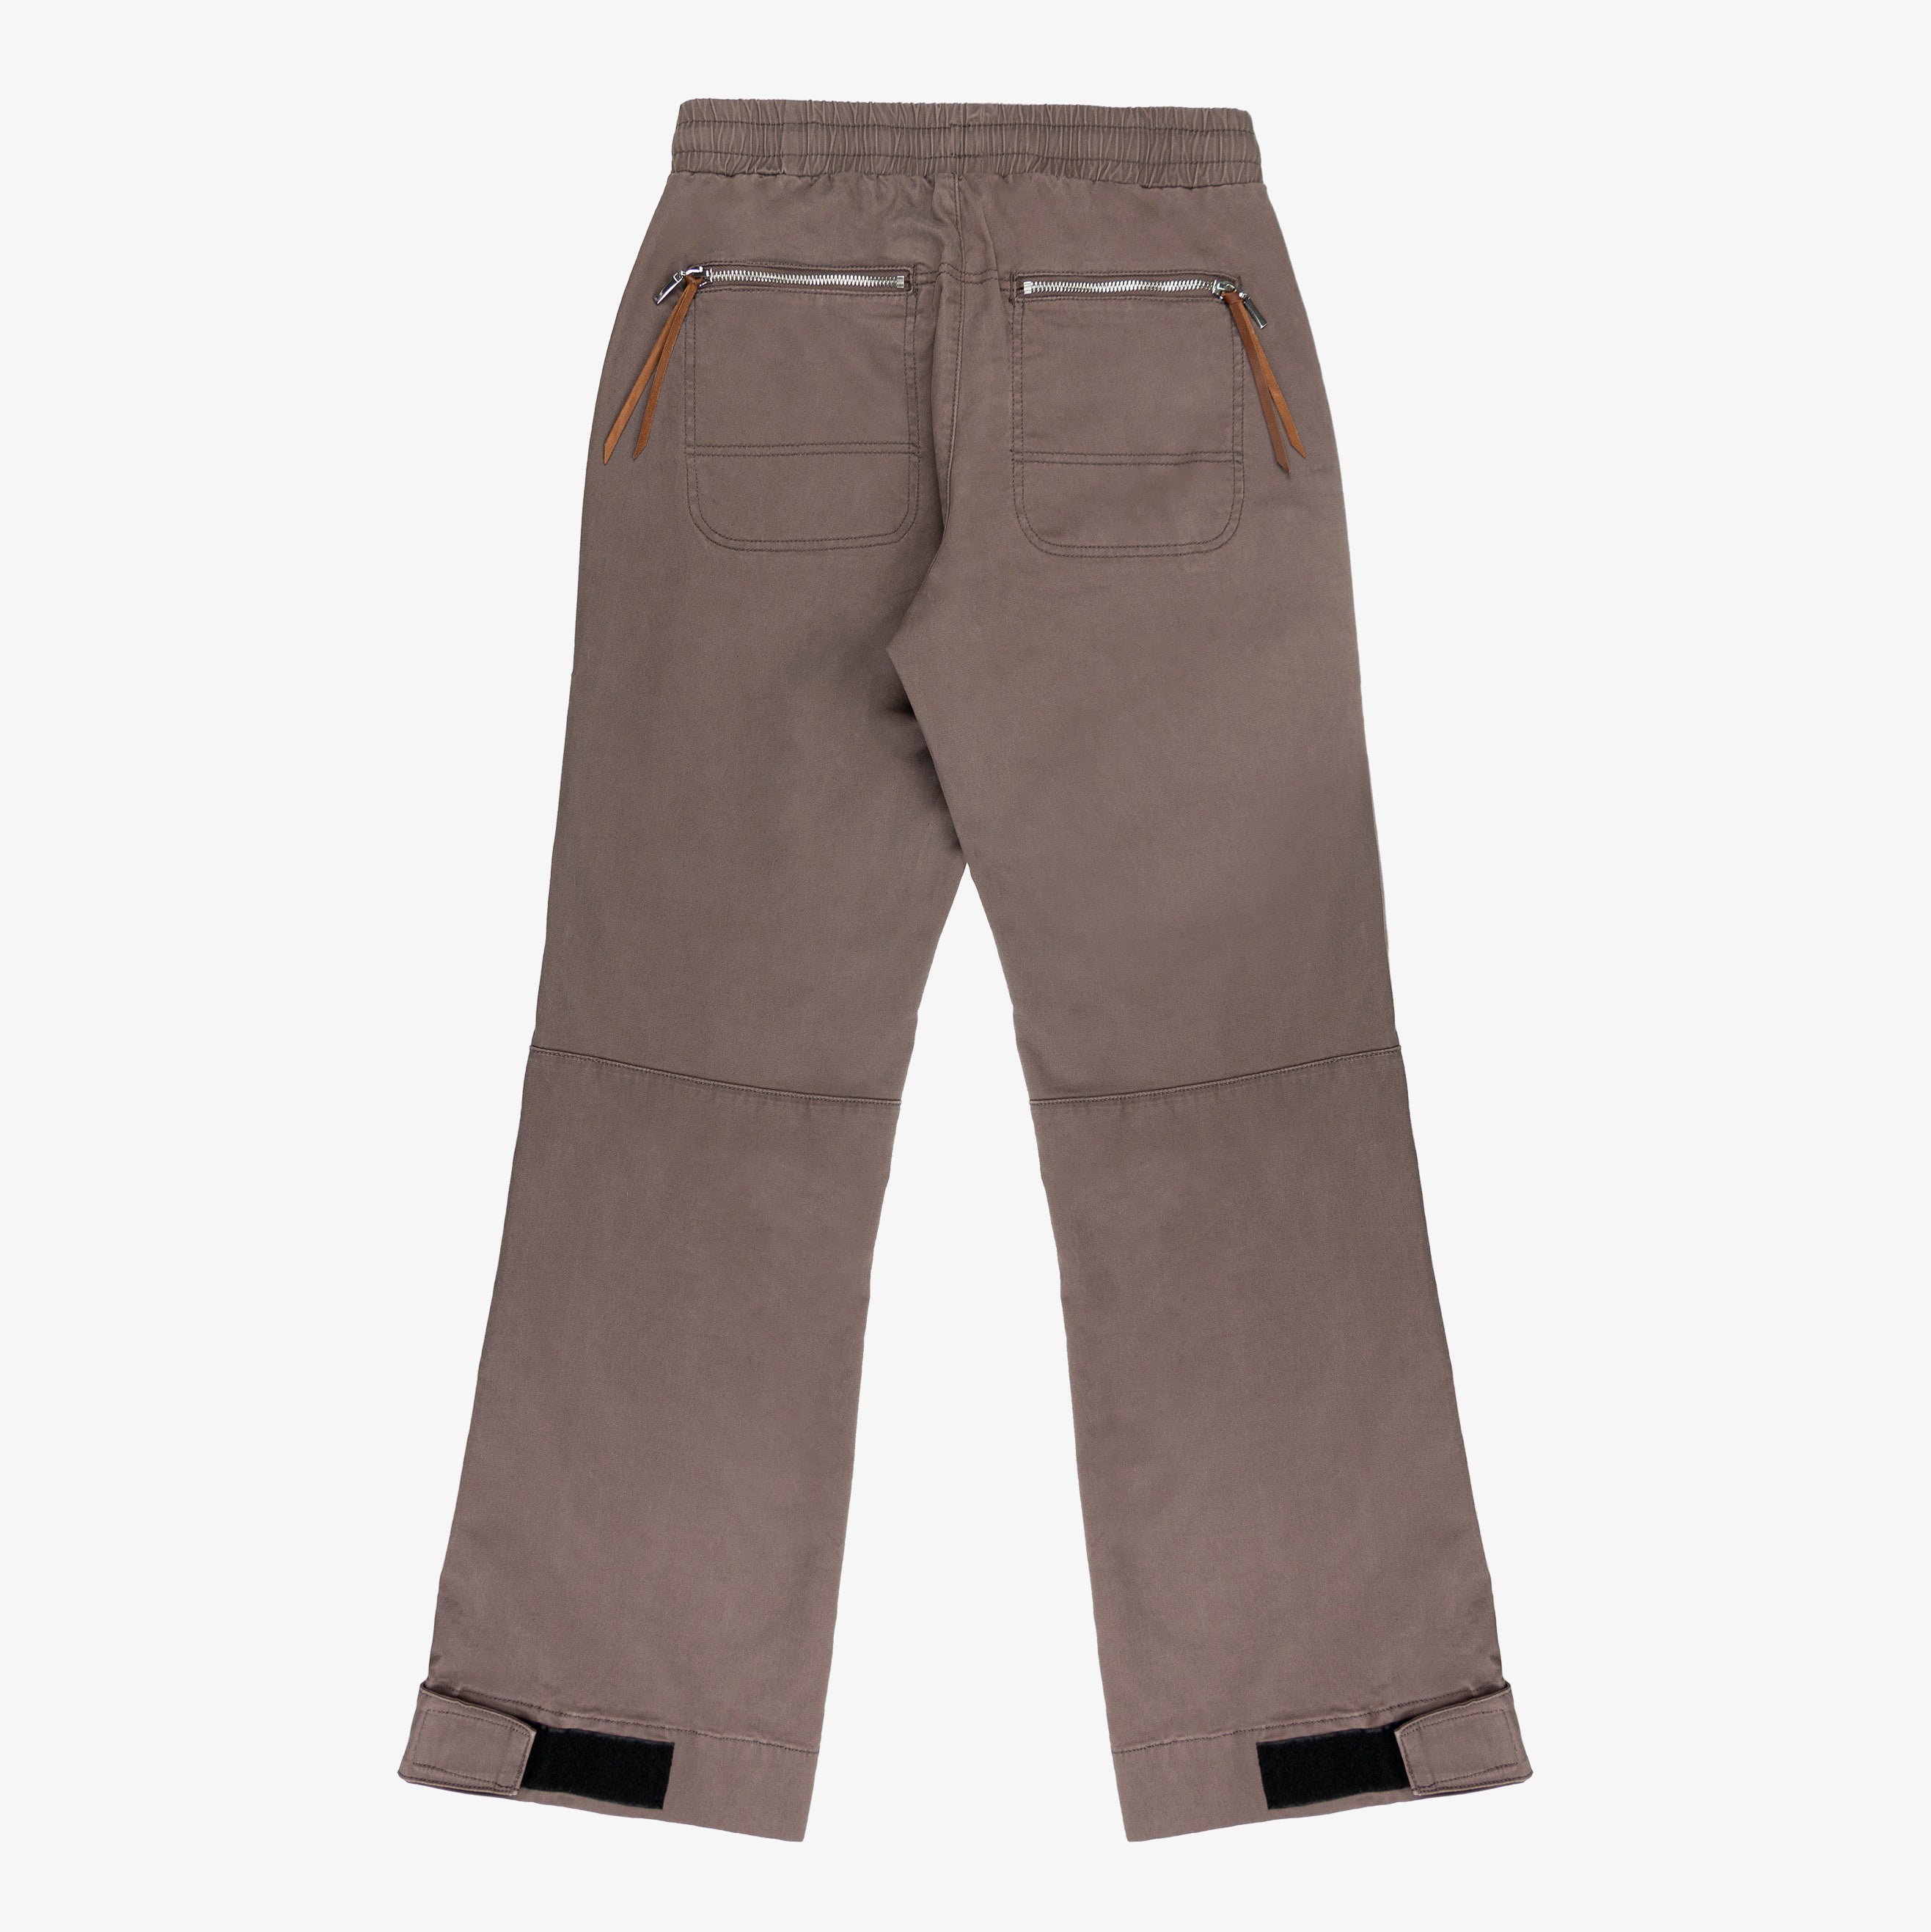 Blaklader Basic Engineers Work Trousers (100% Cotton Twill) - 1725 1210  Trousers Active-Workwear